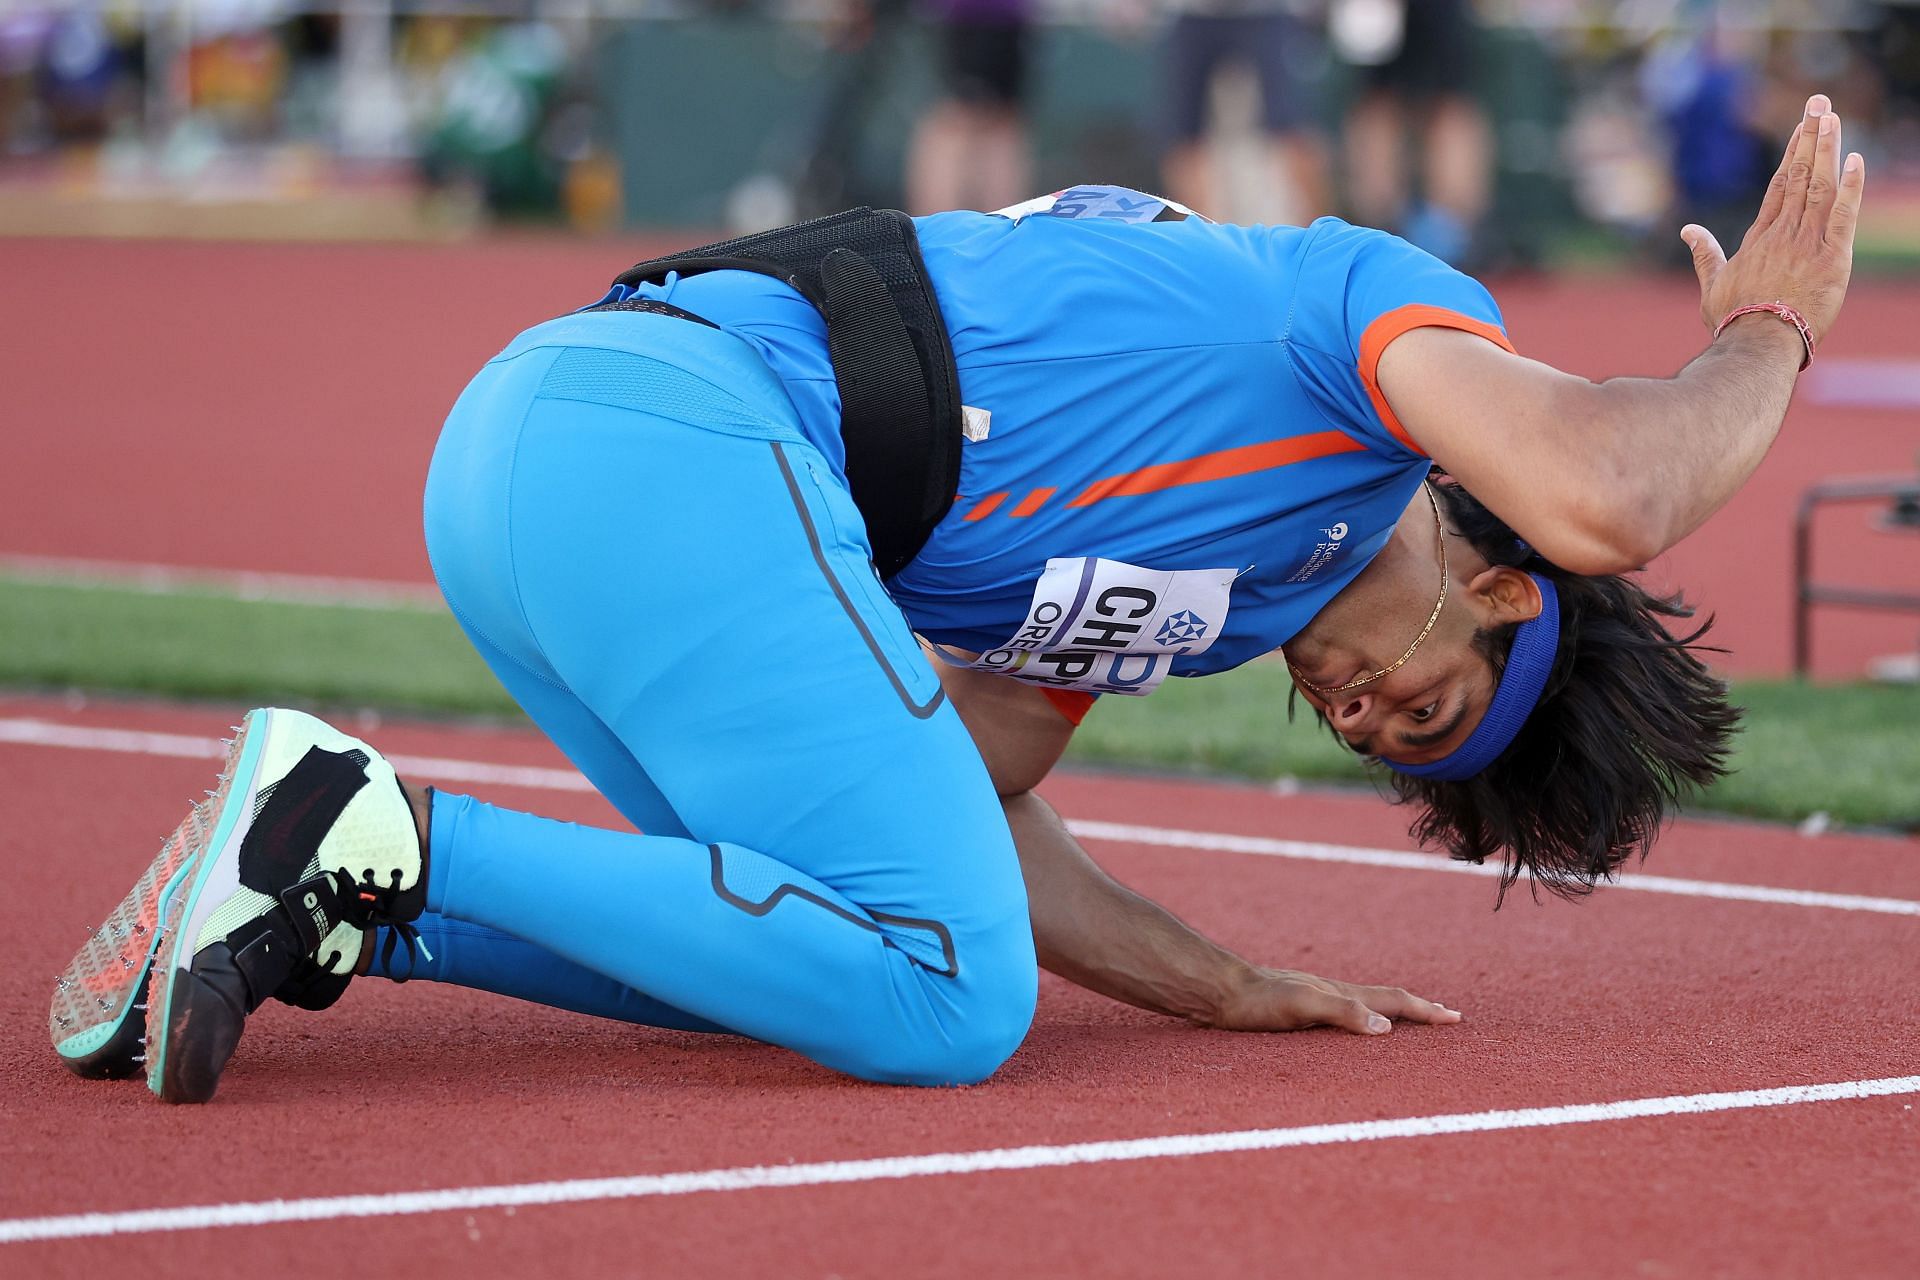 Neeraj Chopra was unimpressed with himself after a relatively poor final throw